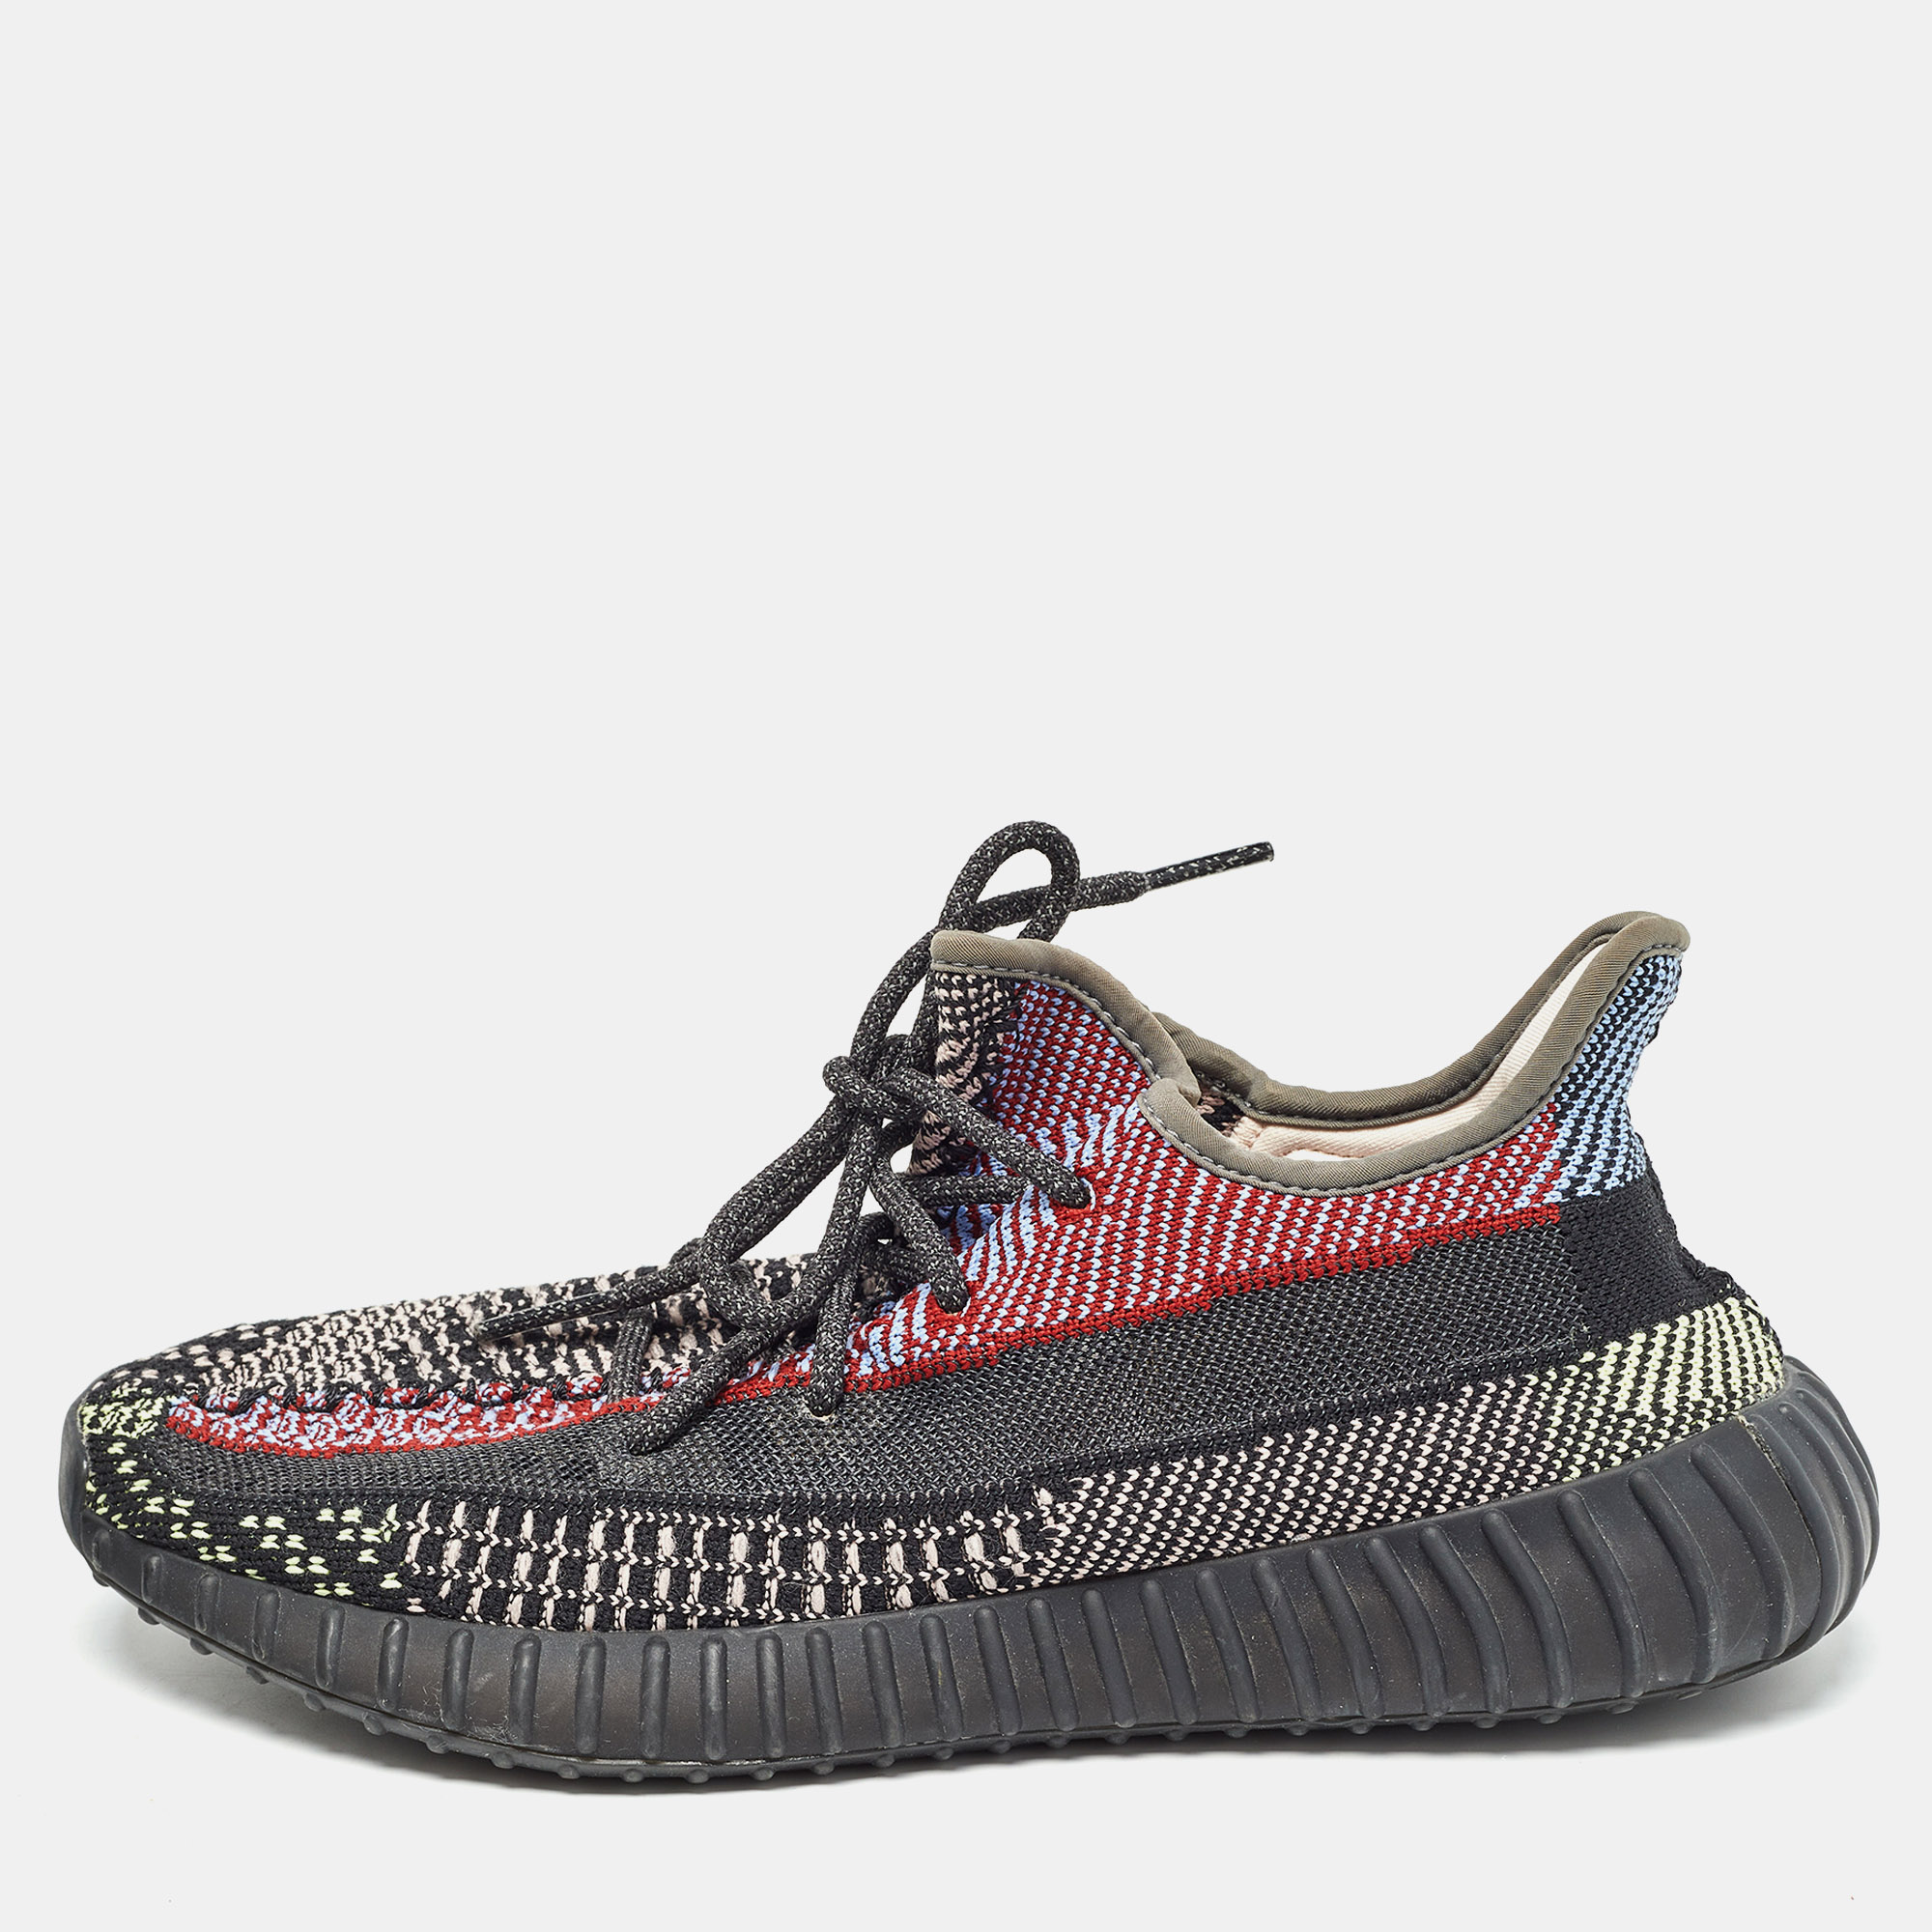 Pre-owned Yeezy X Adidas Multicolor Knit Fabric Boost 350 V2 Yecheil (non-reflective) Sneakers Size 43 1/3